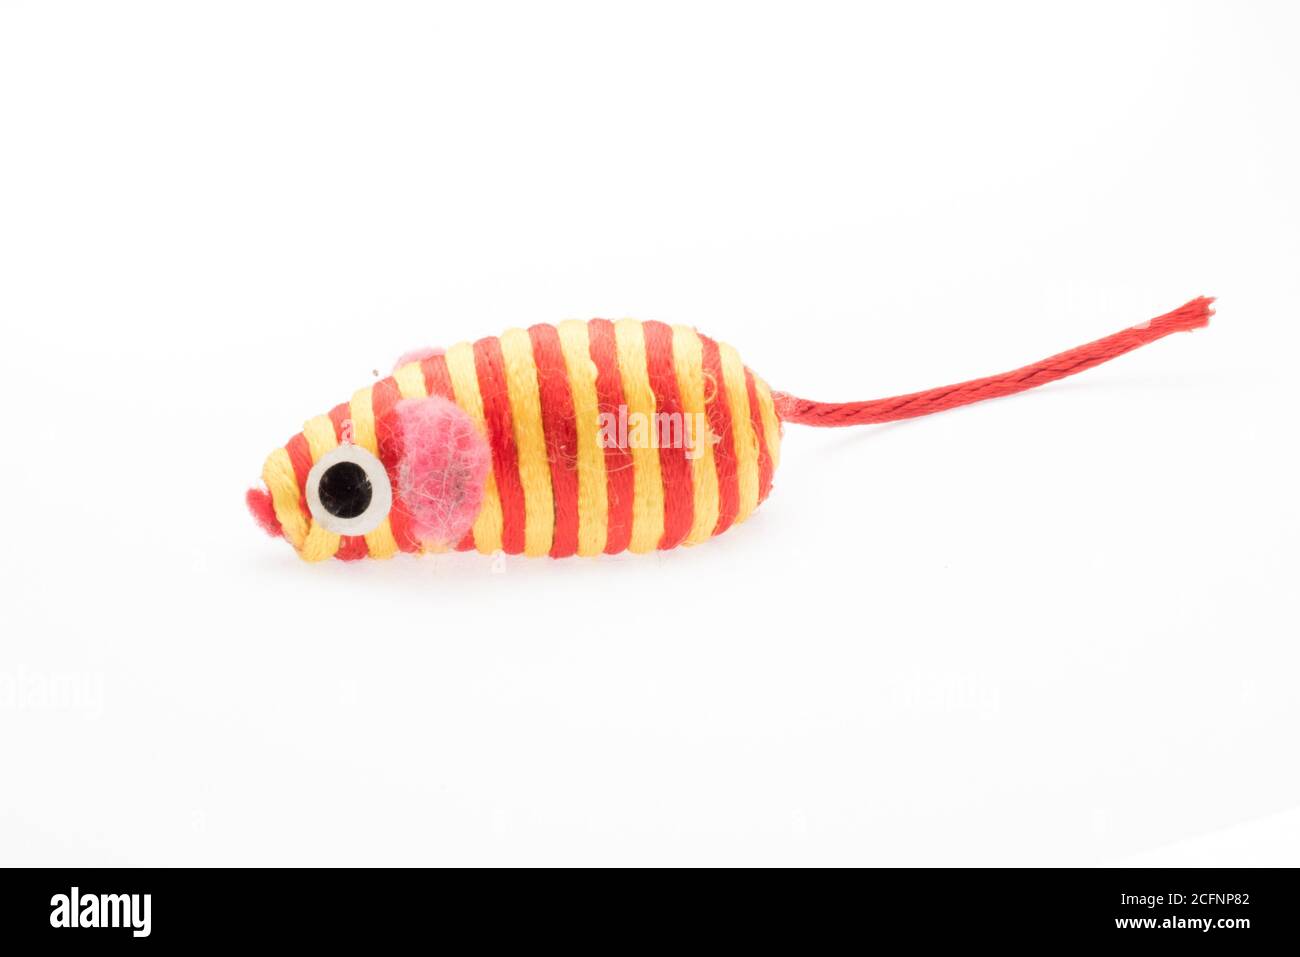 A cat toy that looks like a stripey mouse, photographed isolated on a white background. Stock Photo